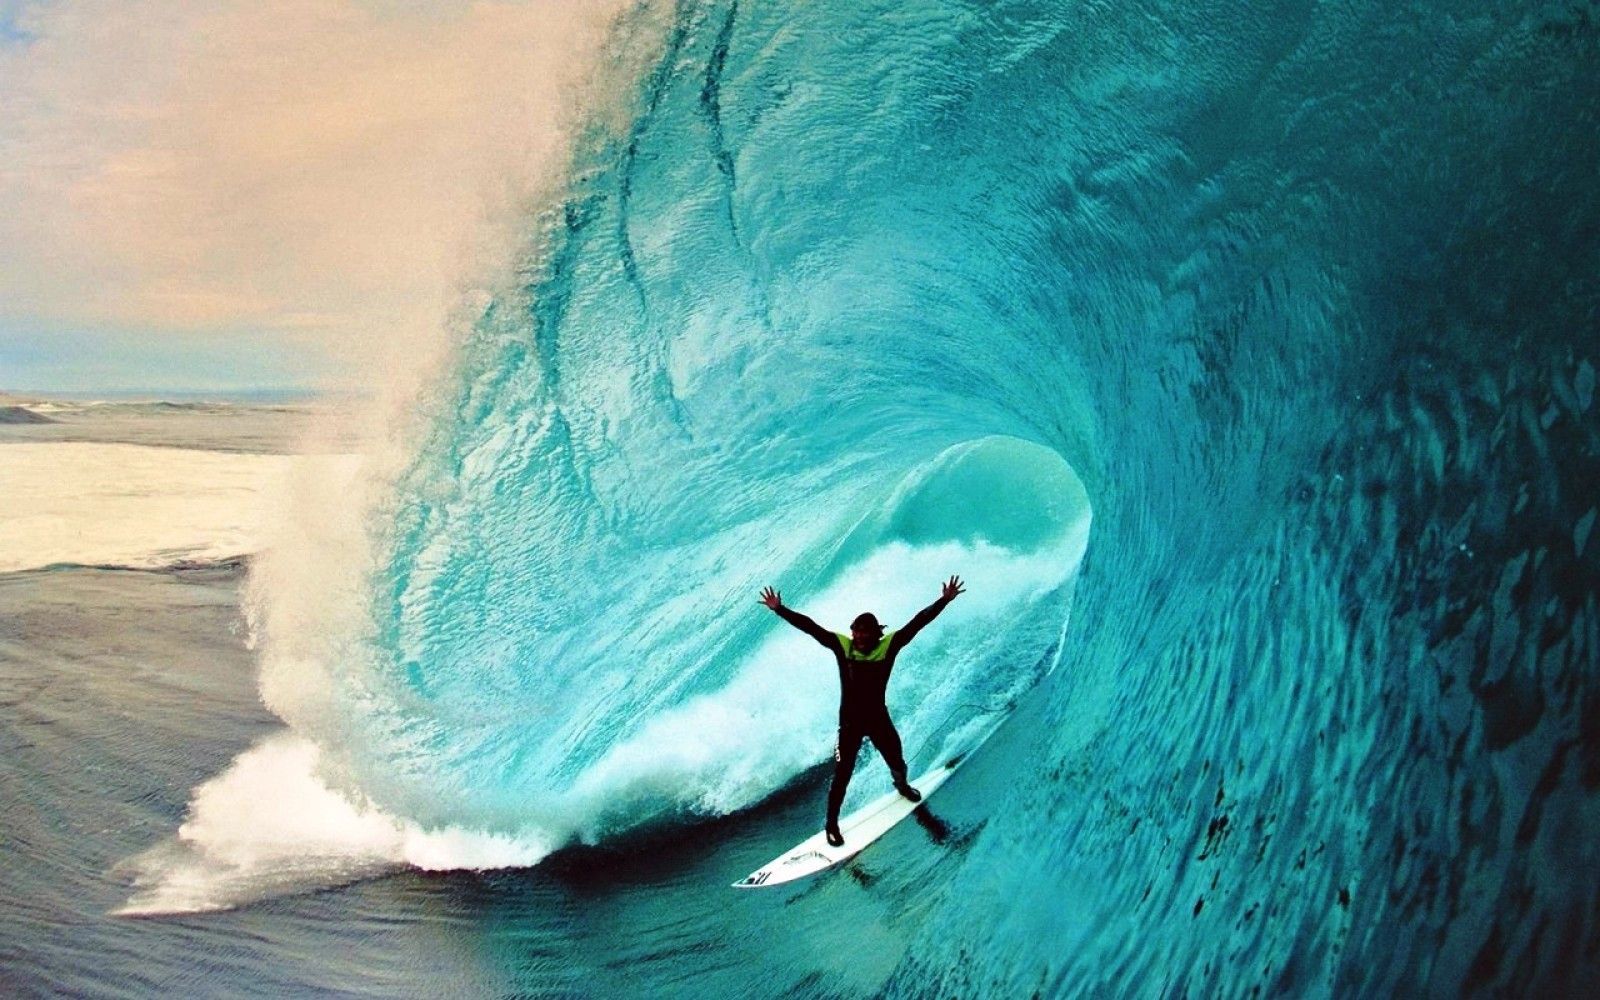 Surfer on a blue wave - 1600x1200 - Wallpaper on WallpaperMade